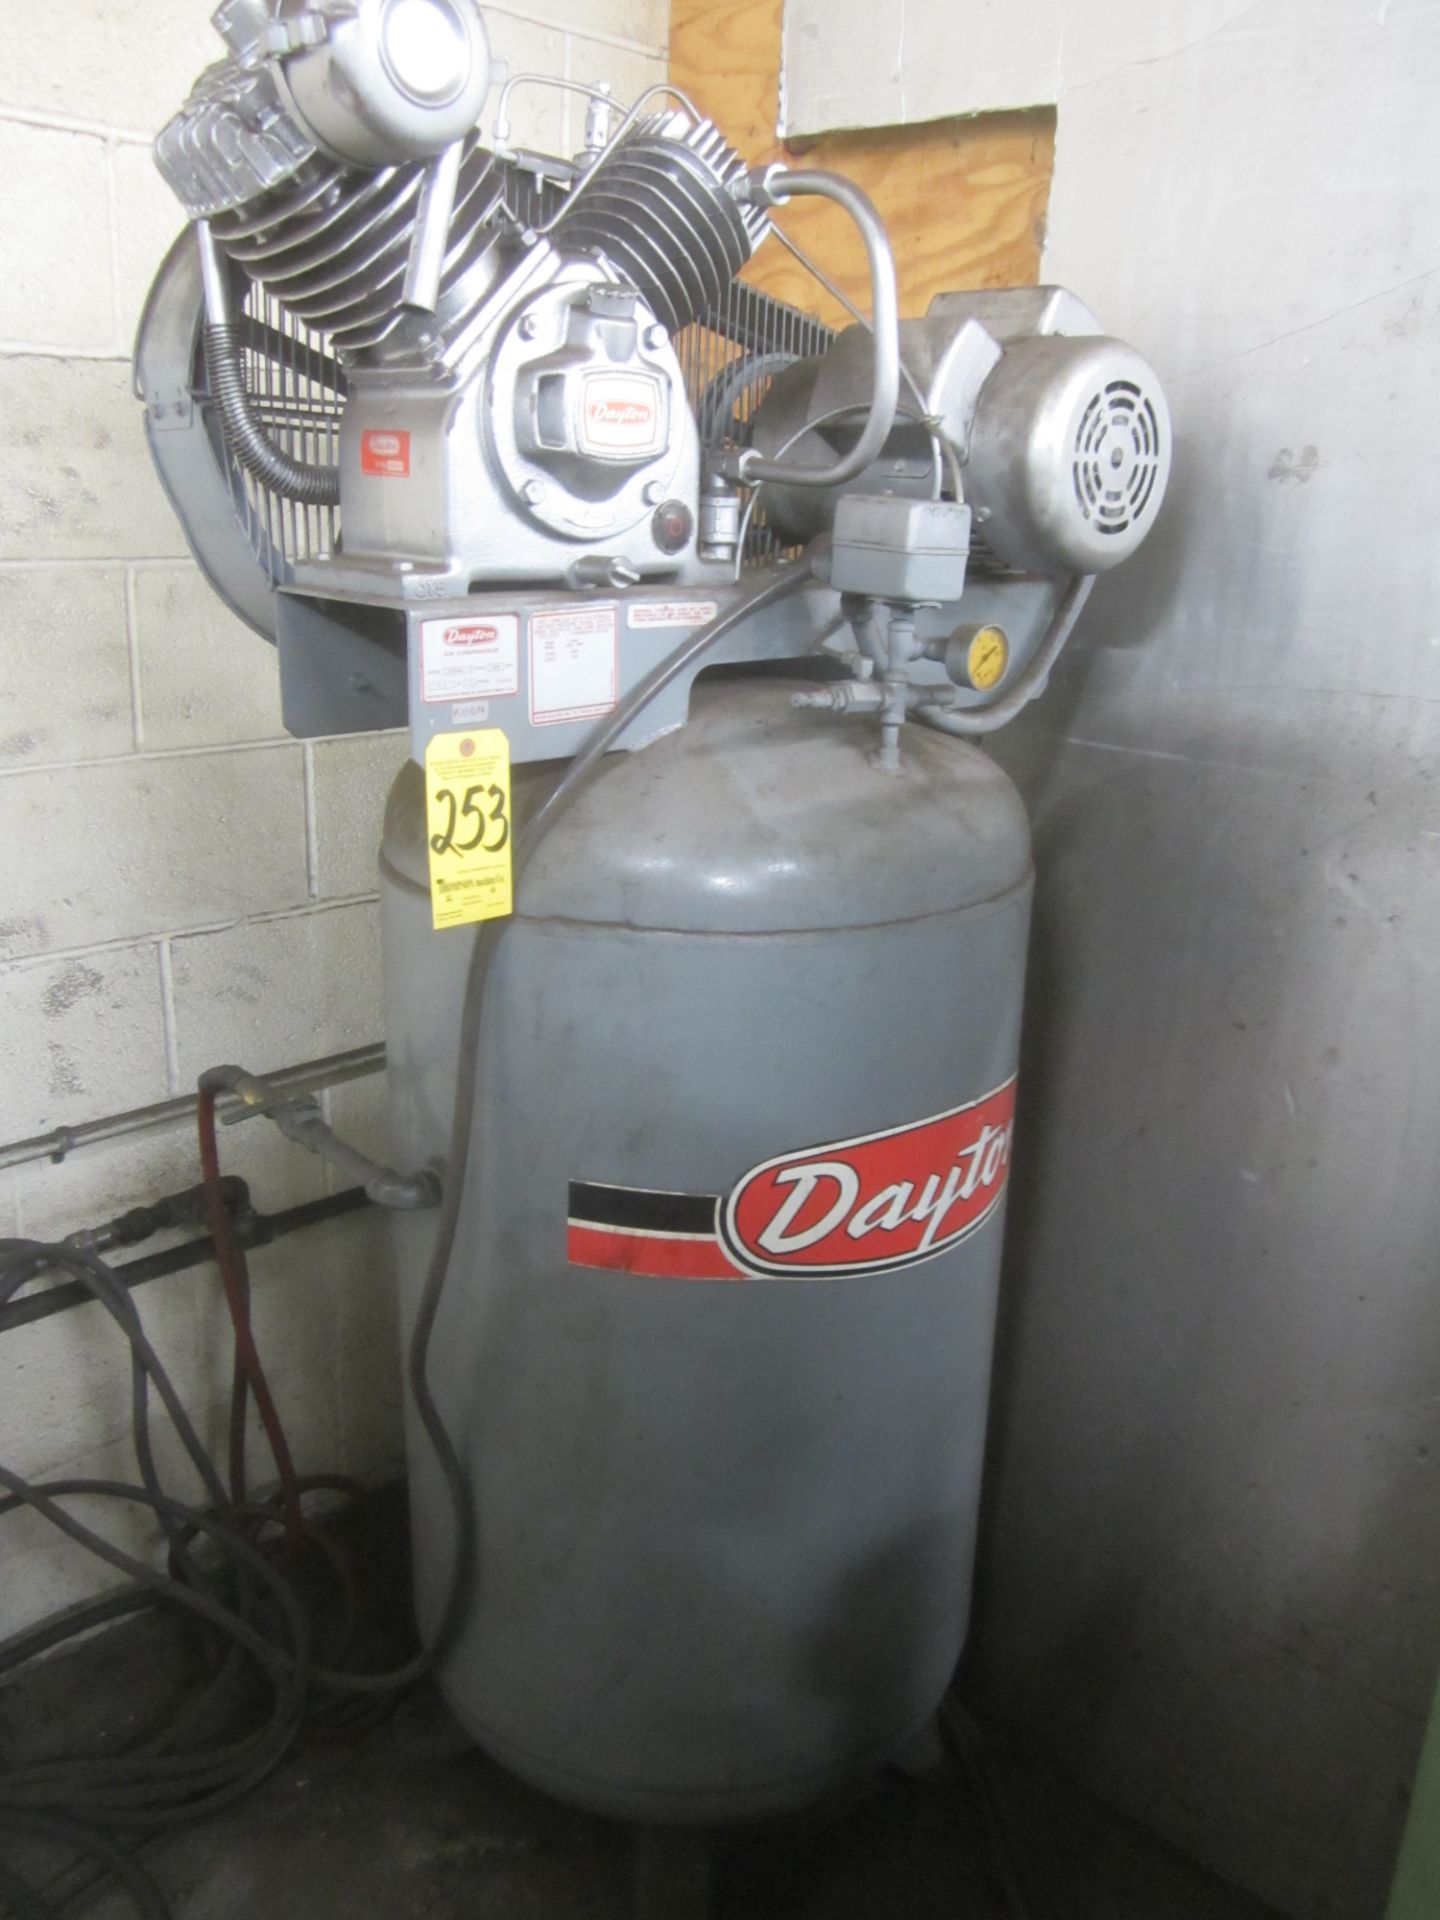 Dayton 2-Stage Air Compressor, Tank Mounted, 5 HP, 230/1/60, Vertical Mount, Loading Fee $75.00